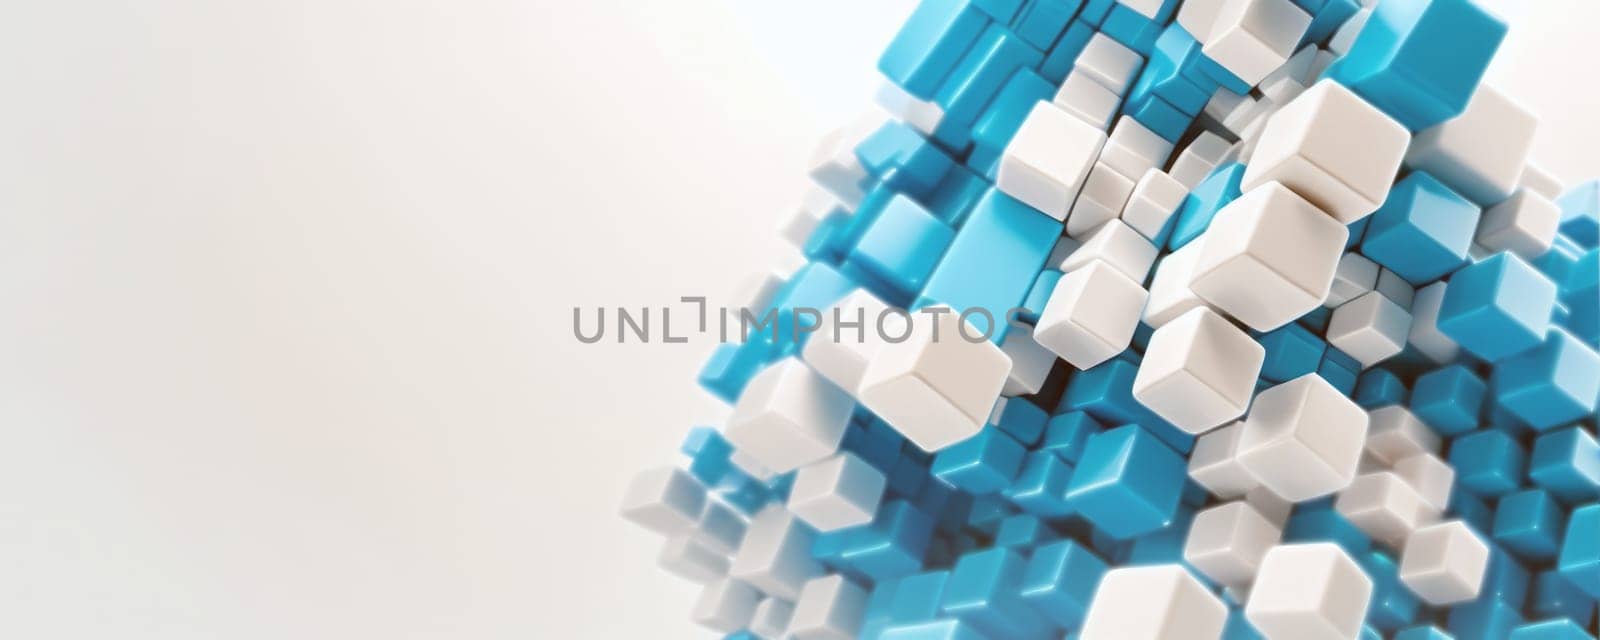 This is a generative art image of a cluster of three-dimensional cubes, with varying shades of blue and white. The cubes are arranged in an irregular pattern, creating a dynamic and complex structure. The background is plain white, making the colorful cubes stand out prominently. There is a sense of movement or transformation, as if the cubes are assembling or disassembling. The lighting casts soft shadows on the cubes, adding depth and dimension to the image. Generative AI